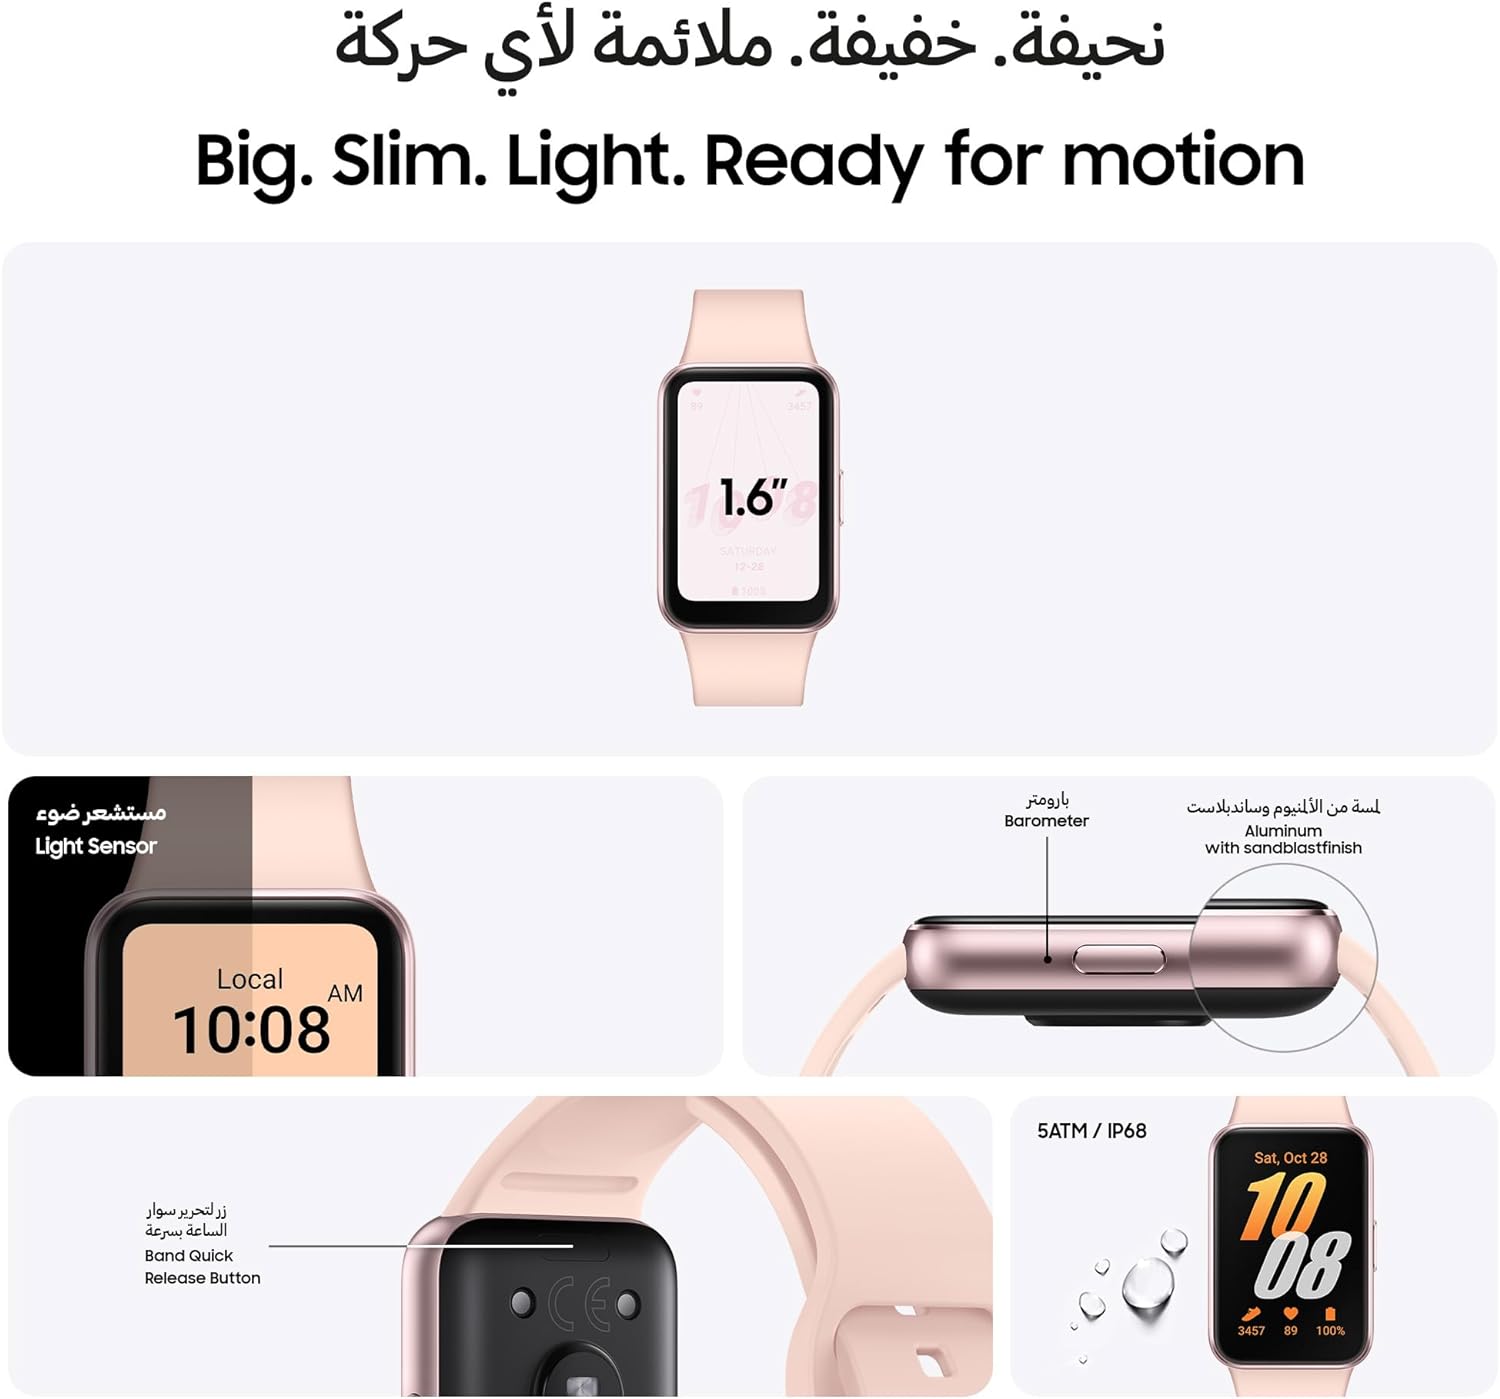 Samsung Galaxy Fit3 Light and Sleek Band - Charges up to 65% in 30 minutes, lasts 13 days. 8806095380353